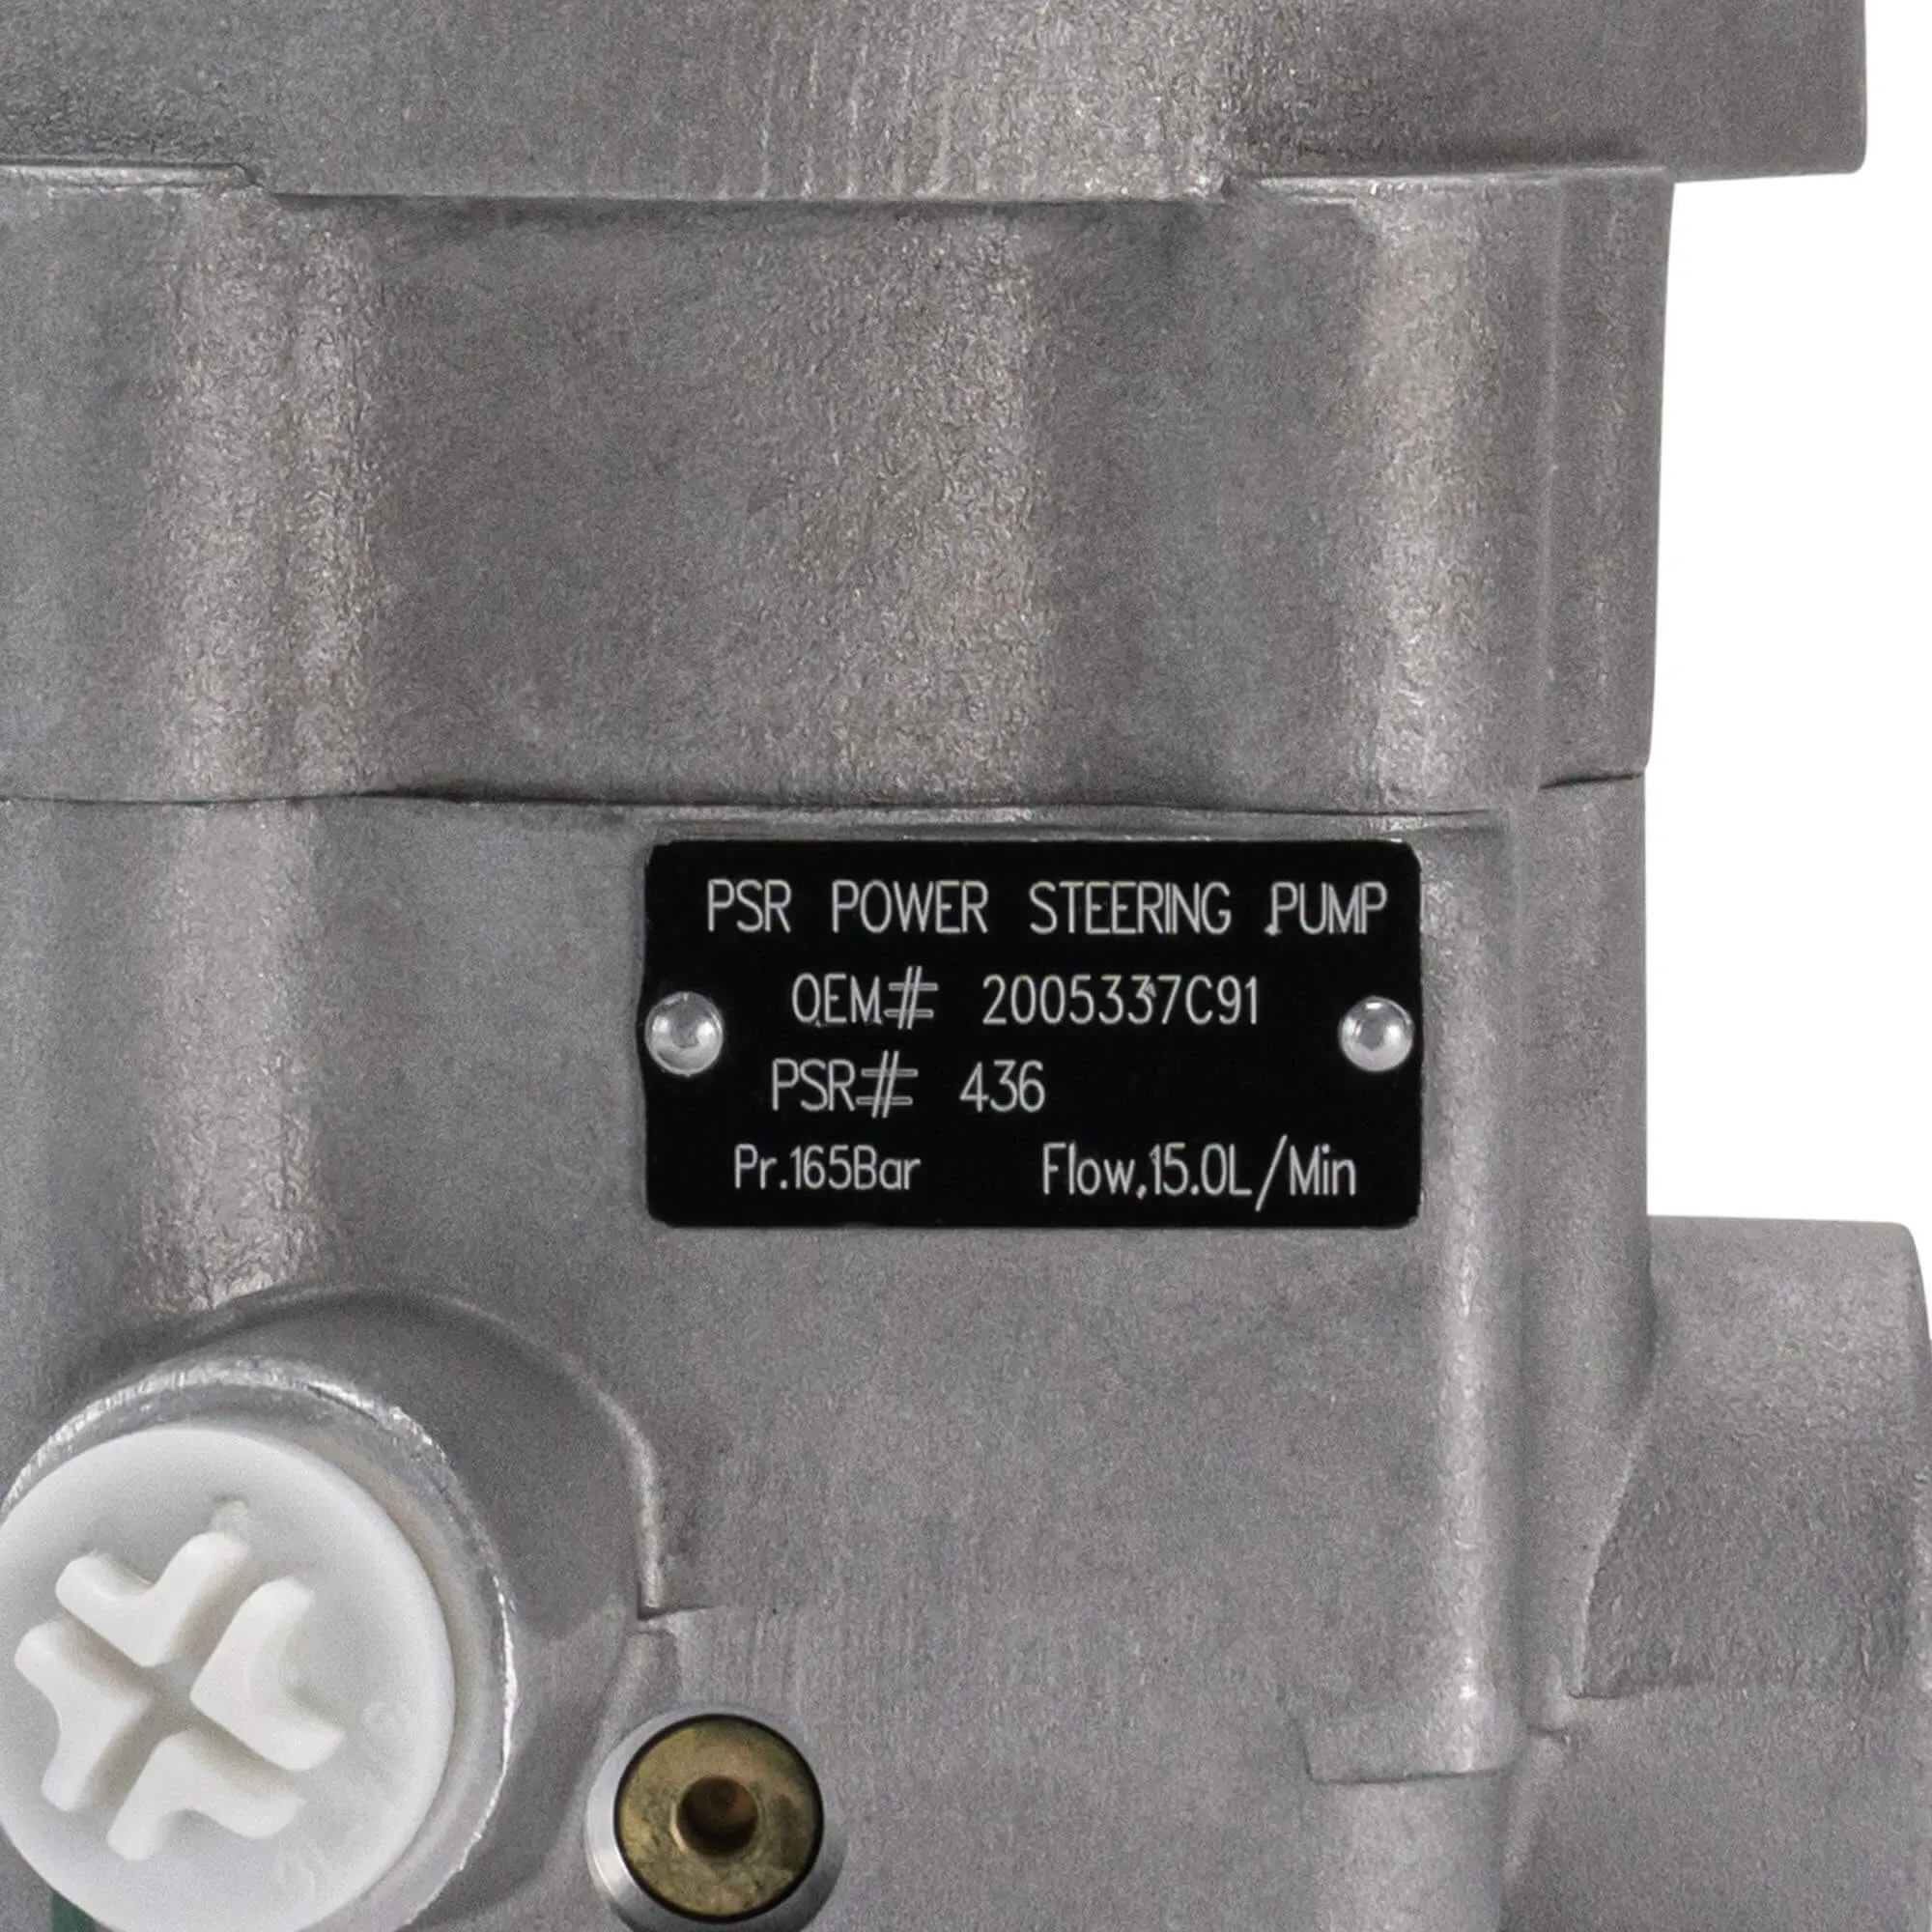 A close up of the label on a power steering pump